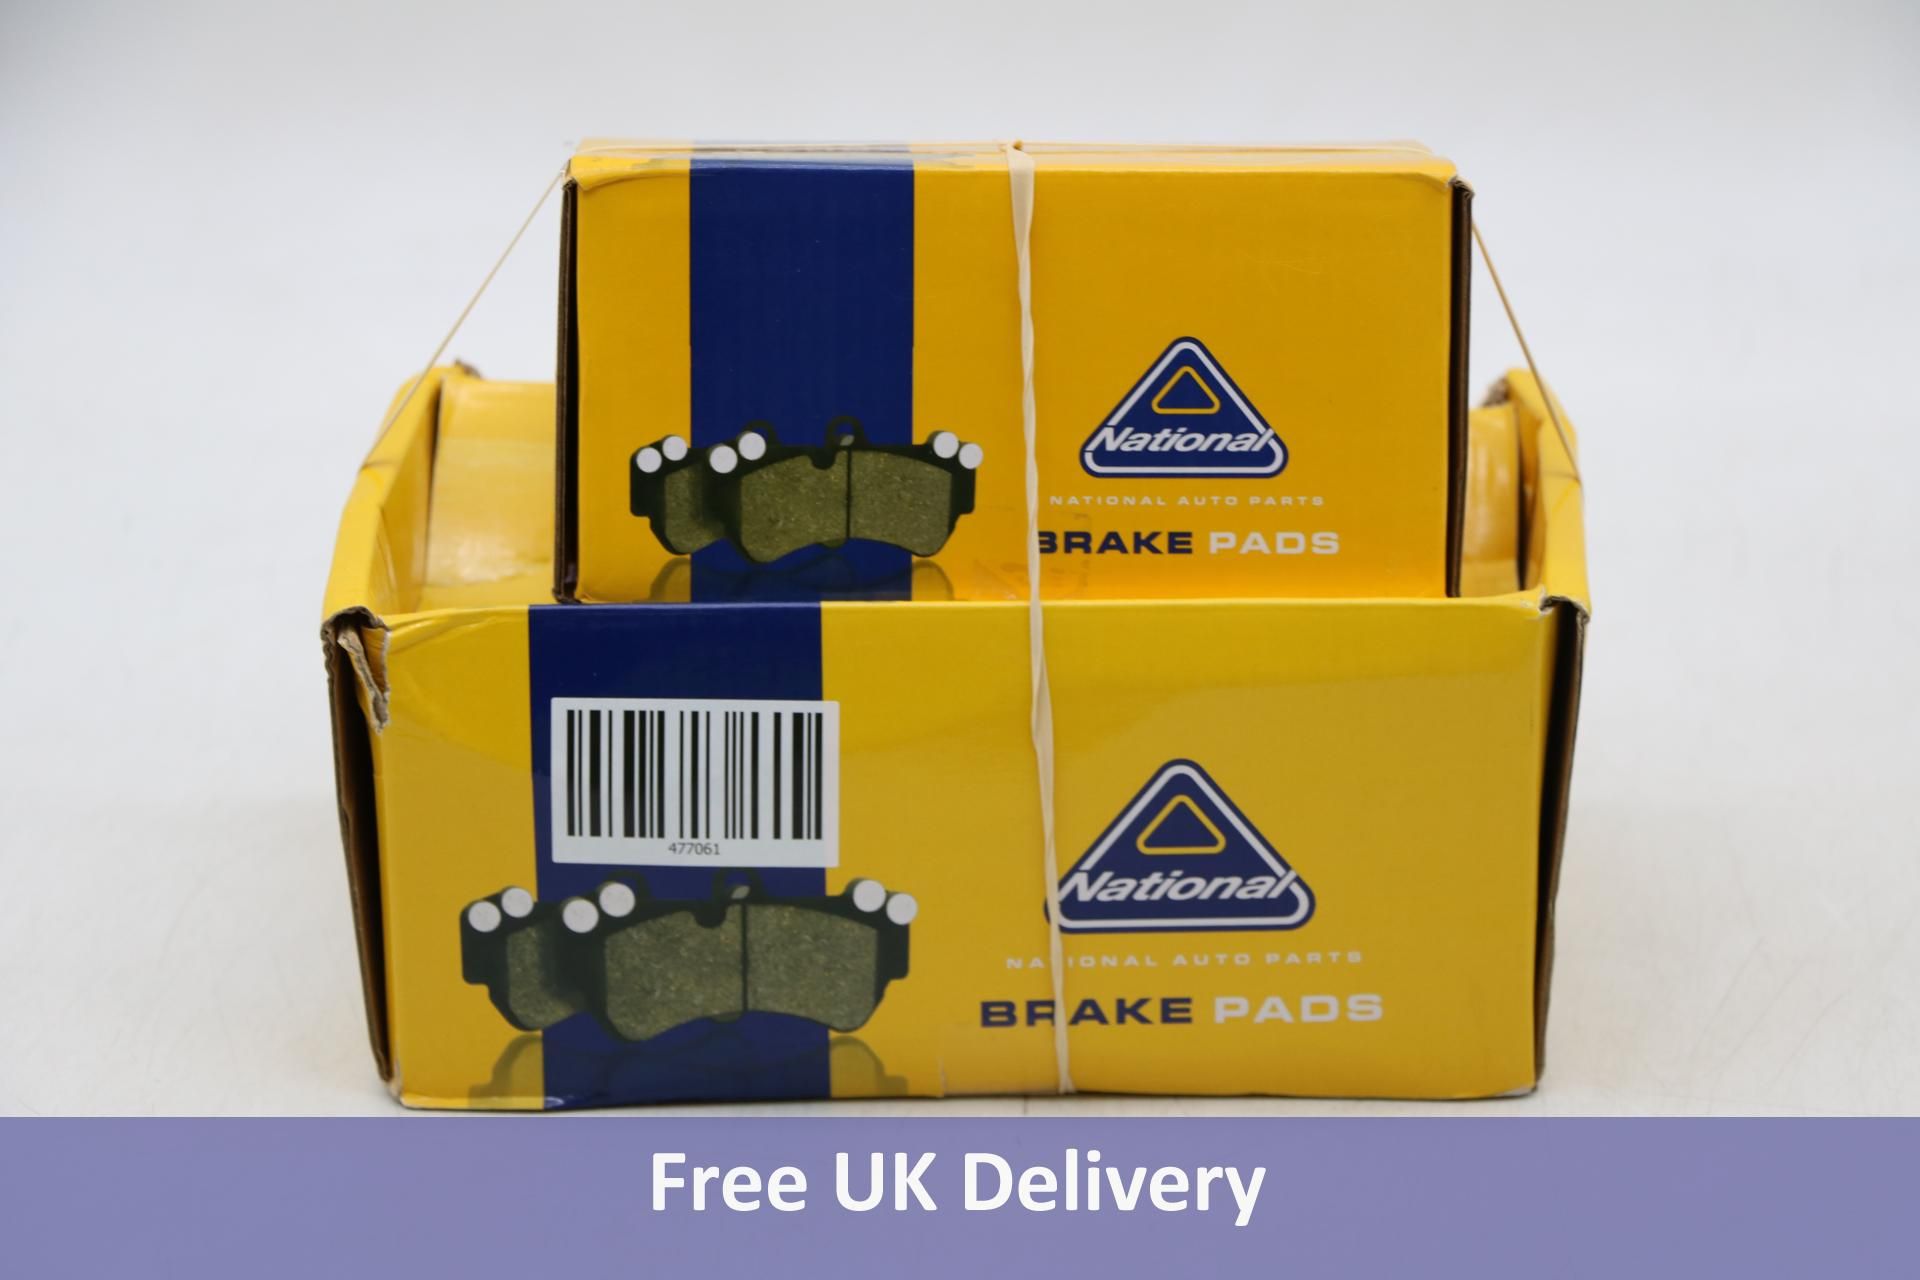 Two Sets of Four National Brake Pads, NP2020, NP2837